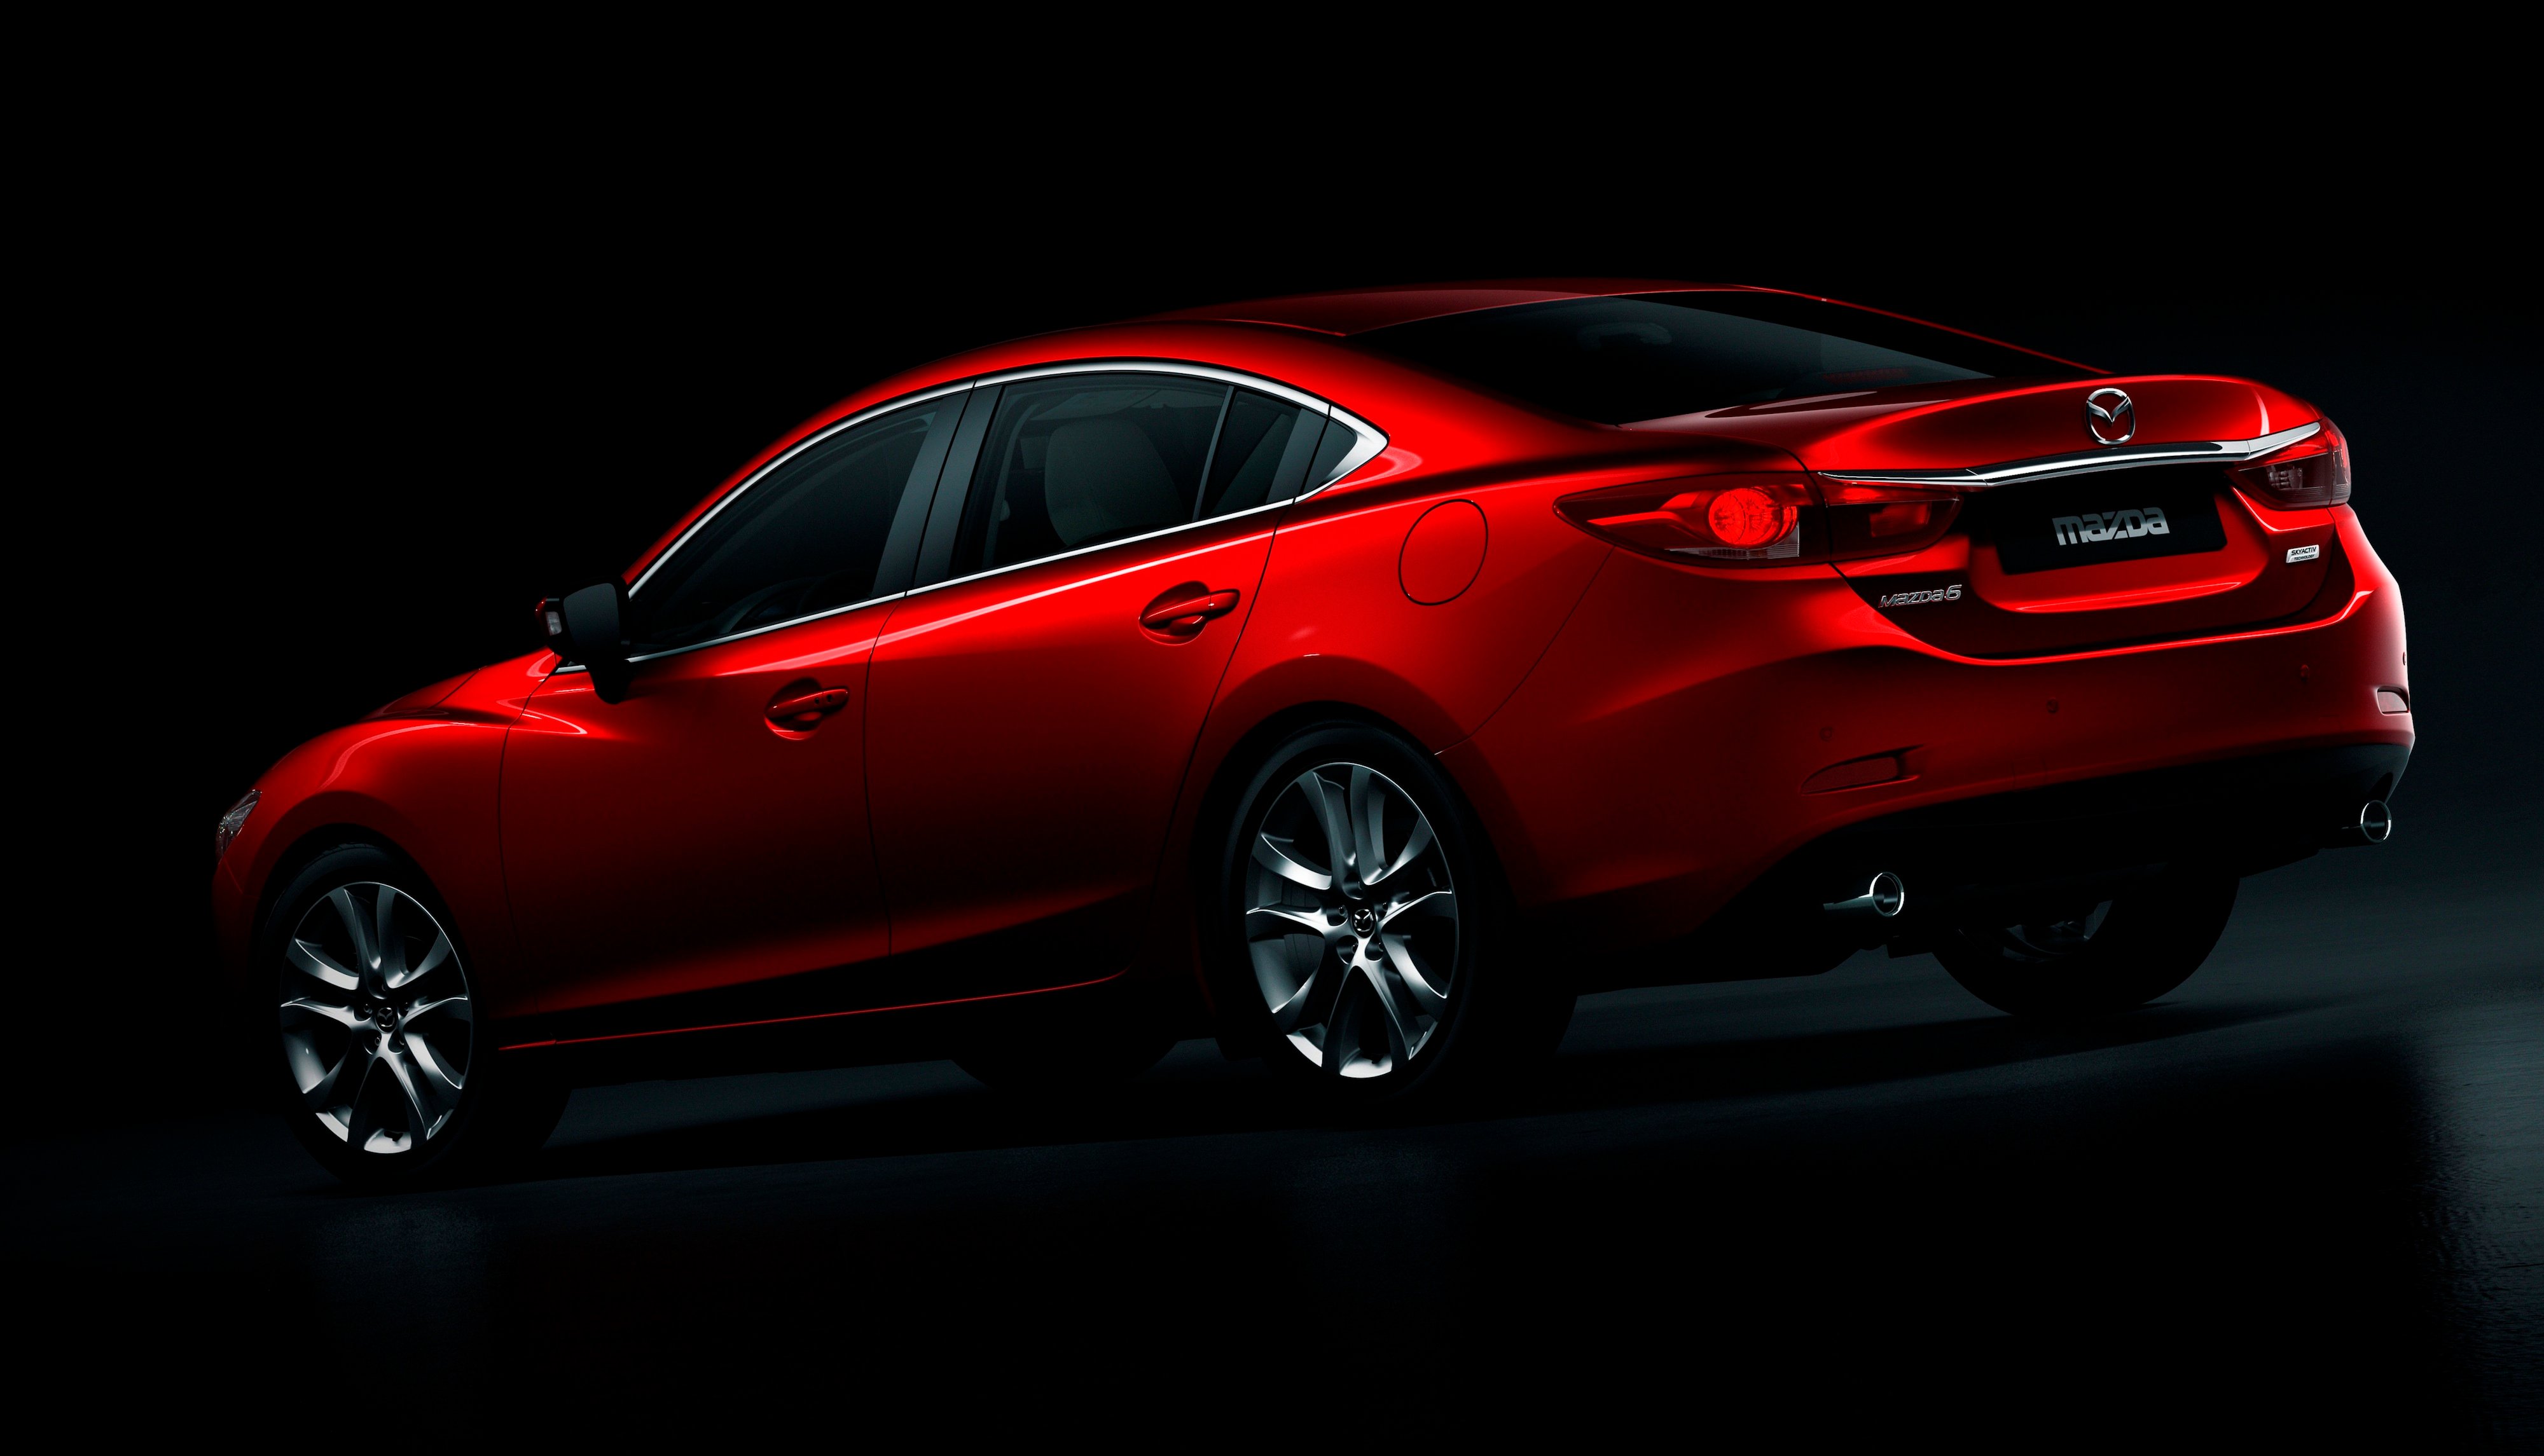 2013 Mazda 6 diesel to beat Camry Hybrid on fuel